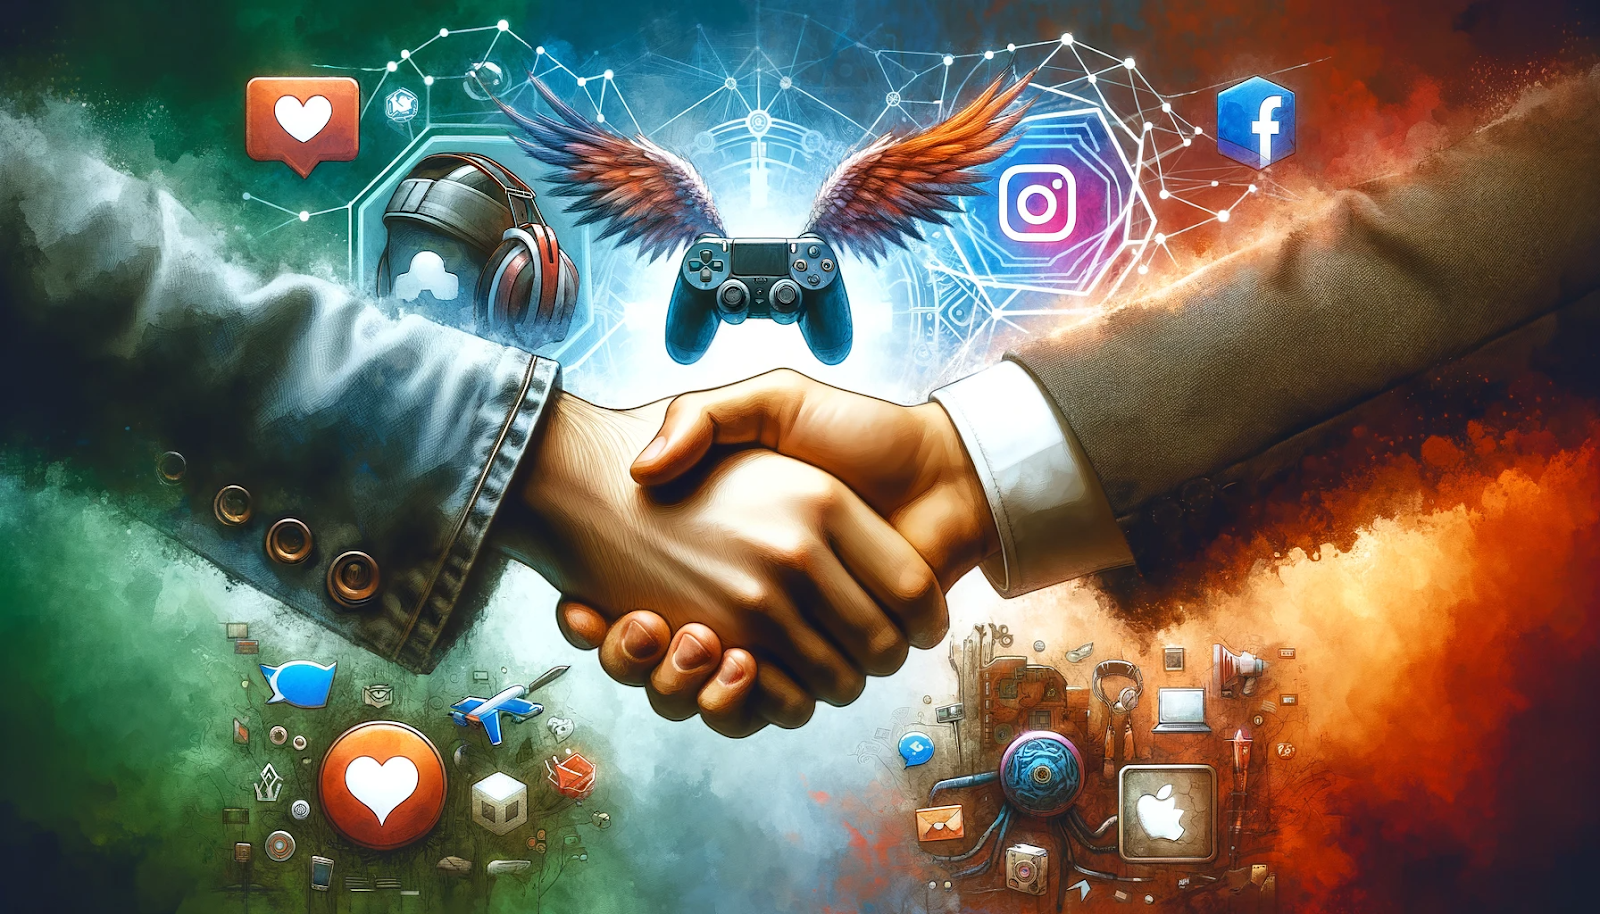 A handshake between a gaming influencer and a brand manager, symbolizing a successful partnership, with a backdrop of social media icons and gaming imagery.